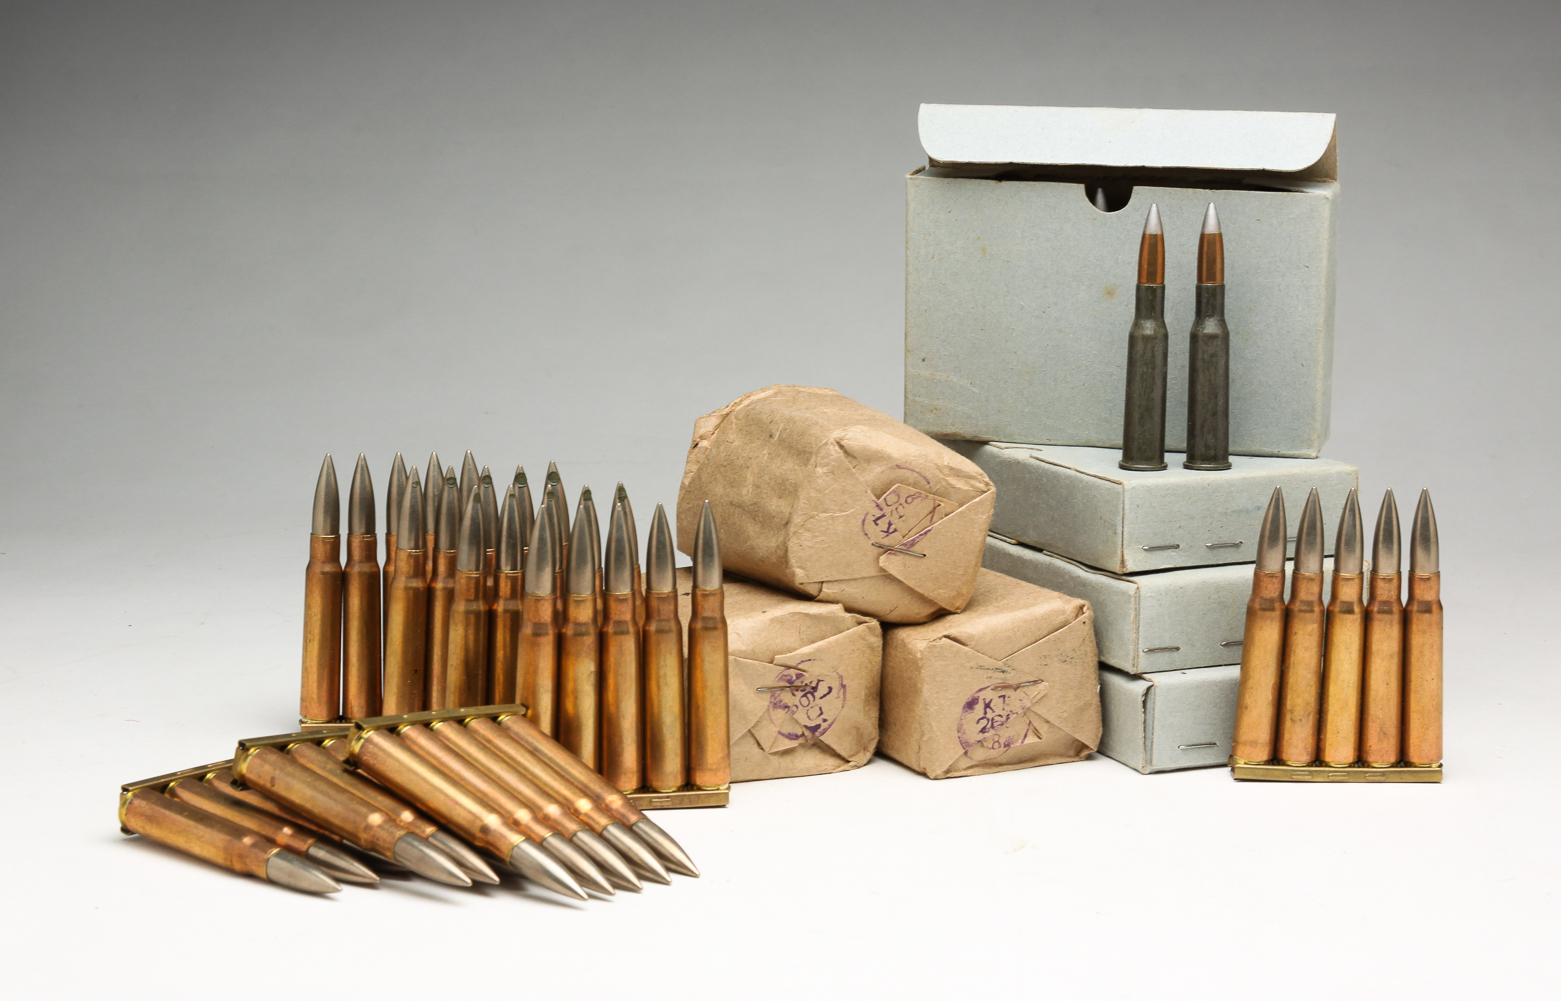 GROUP OF 180 8MM & 7.62X54R ROUNDS